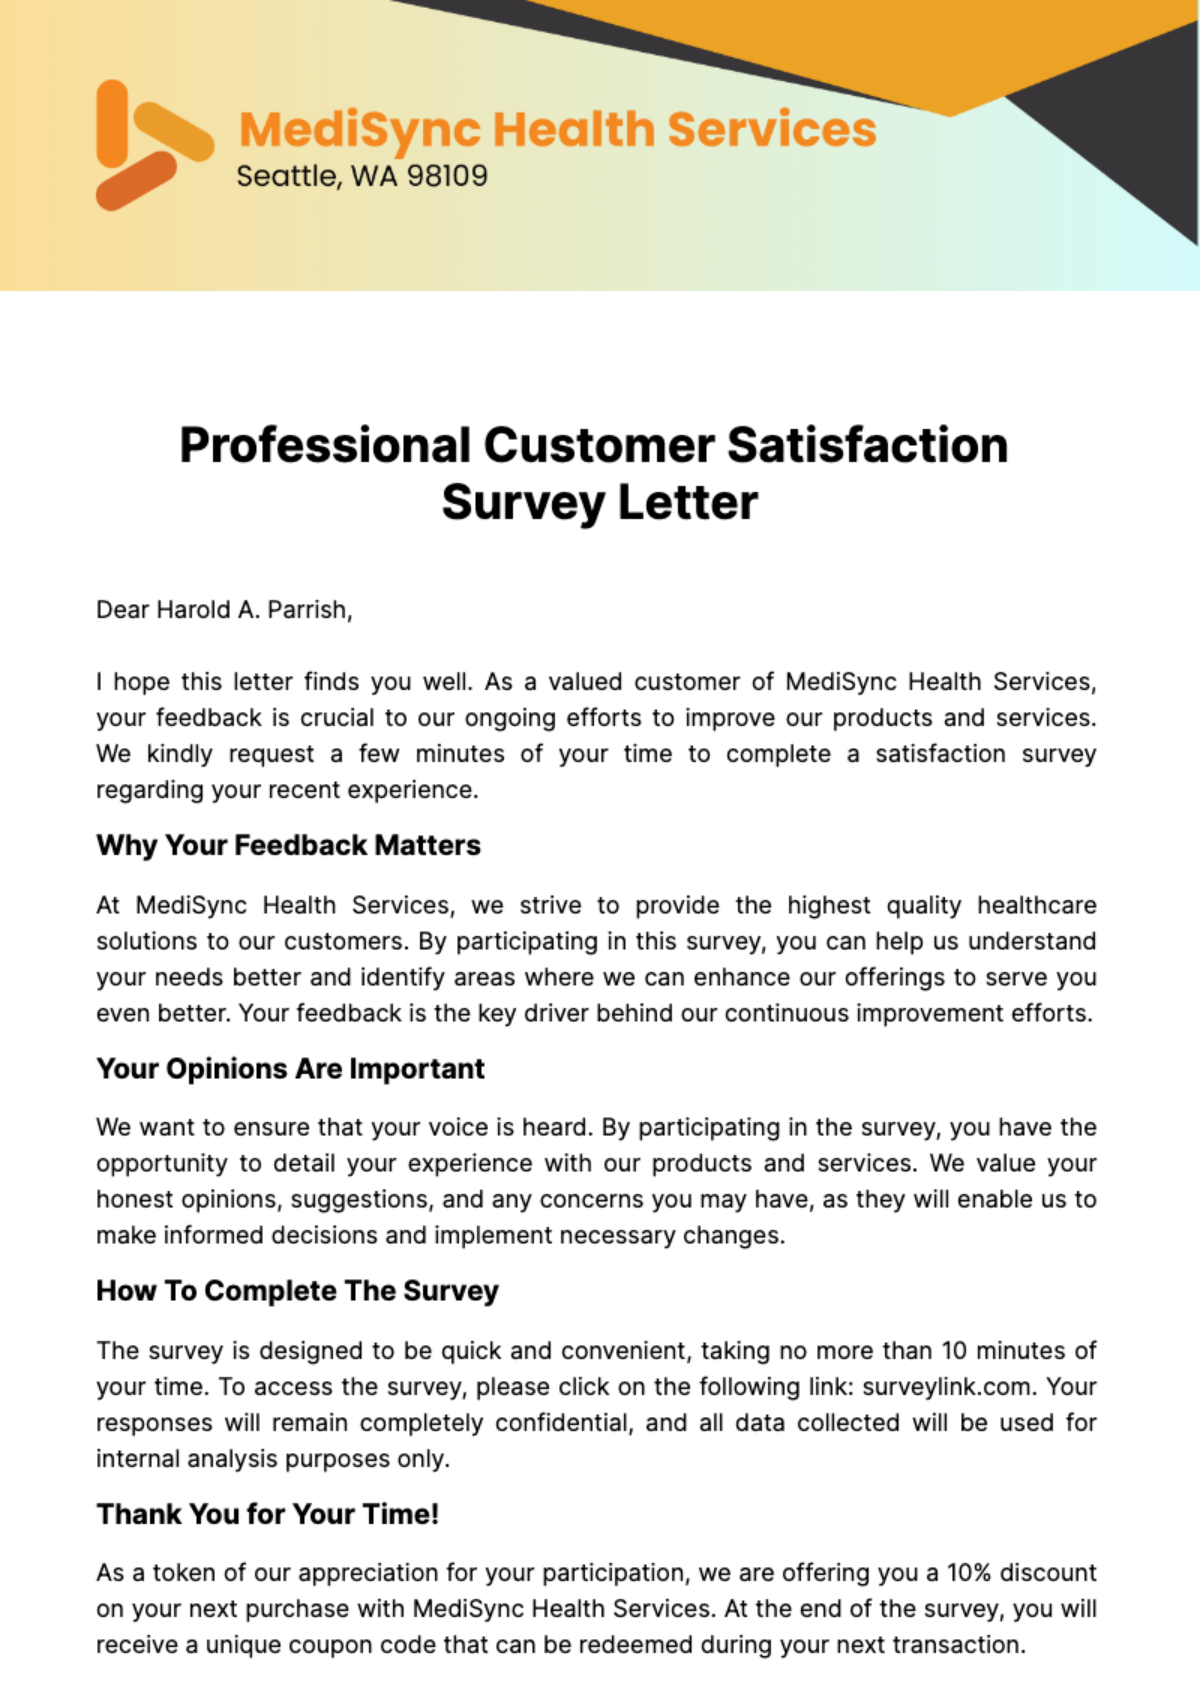 Professional Customer Satisfaction Survey Letter Template